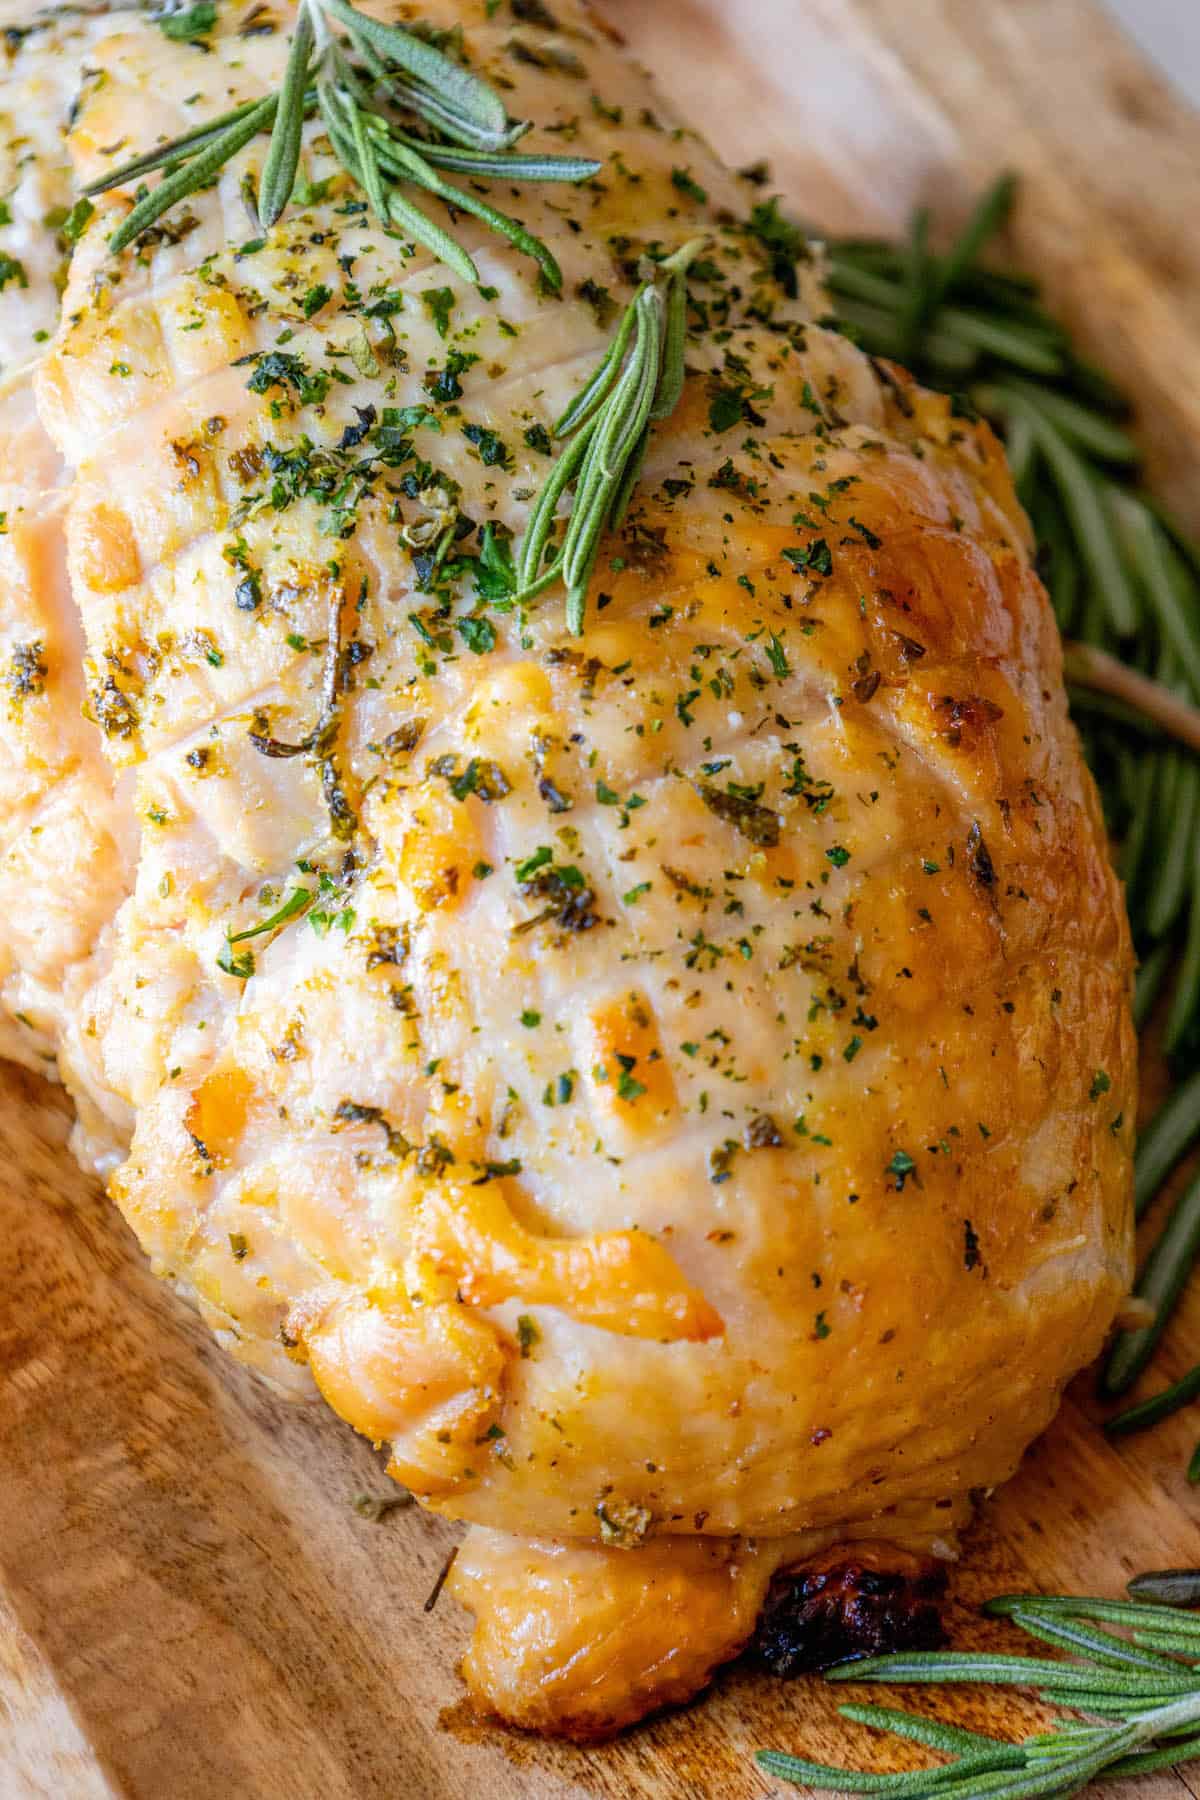 A roasted turkey on a cutting board with sprigs of rosemary. Oven Baked Turkey Breast.